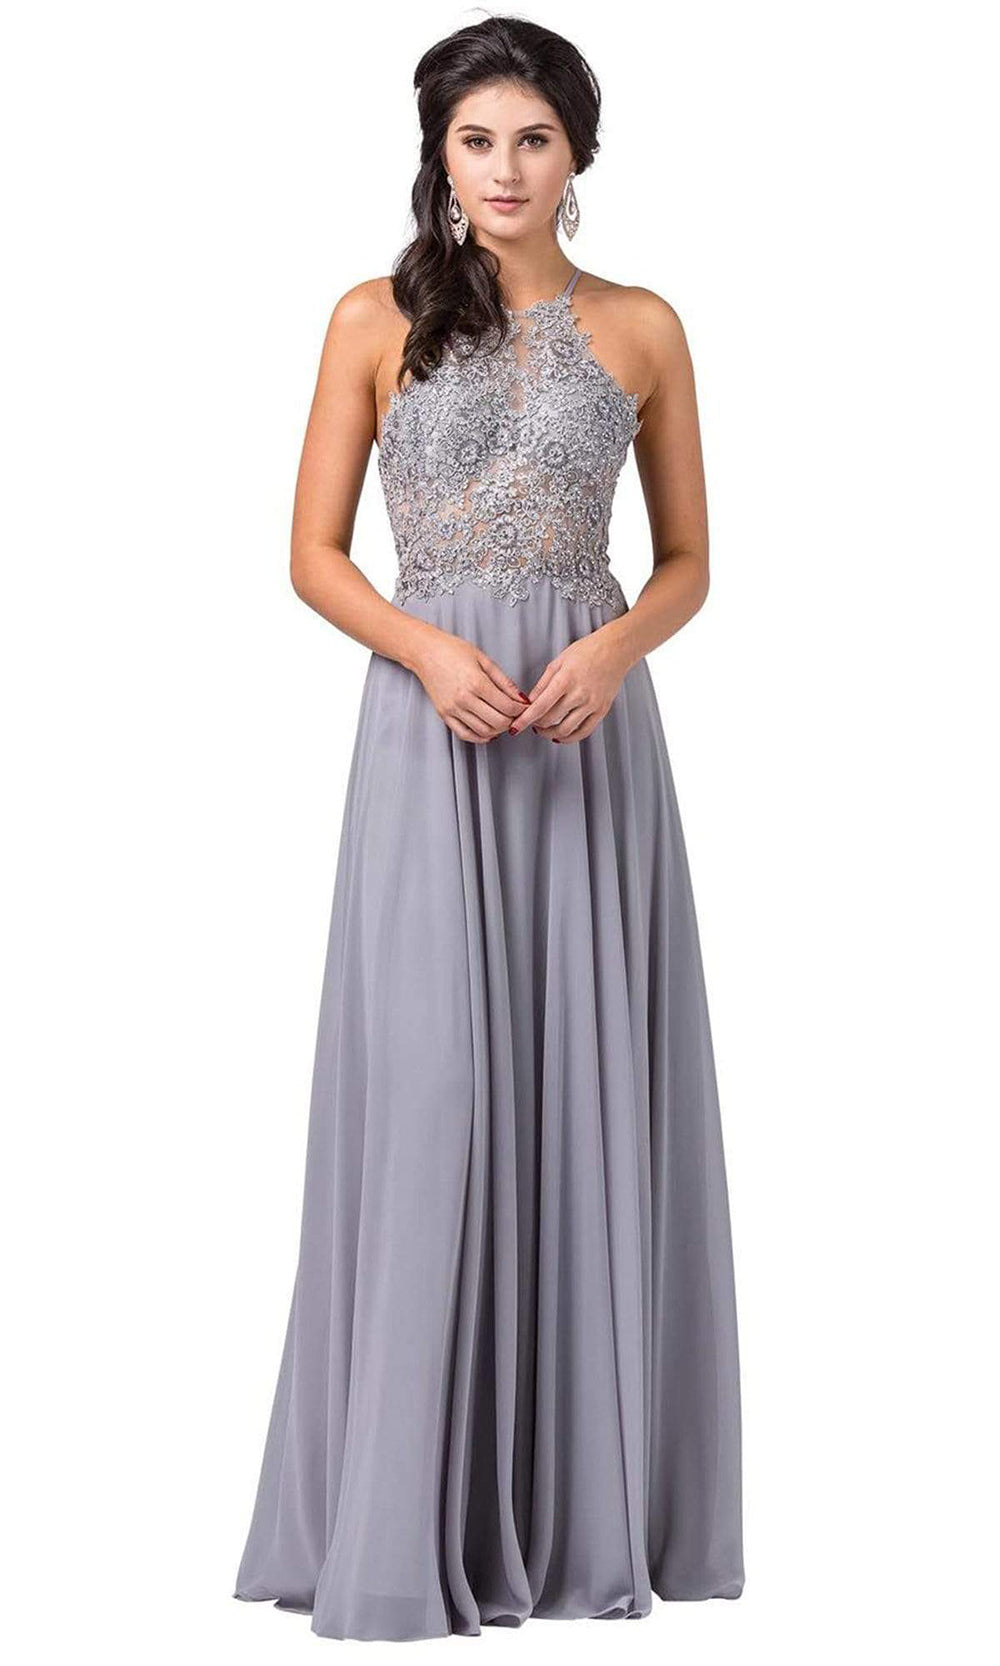 Dancing Queen - Halter Lace Applique A-line Dress 2716 - 1 pc Silver In Size XS Available CCSALE XS / Silver